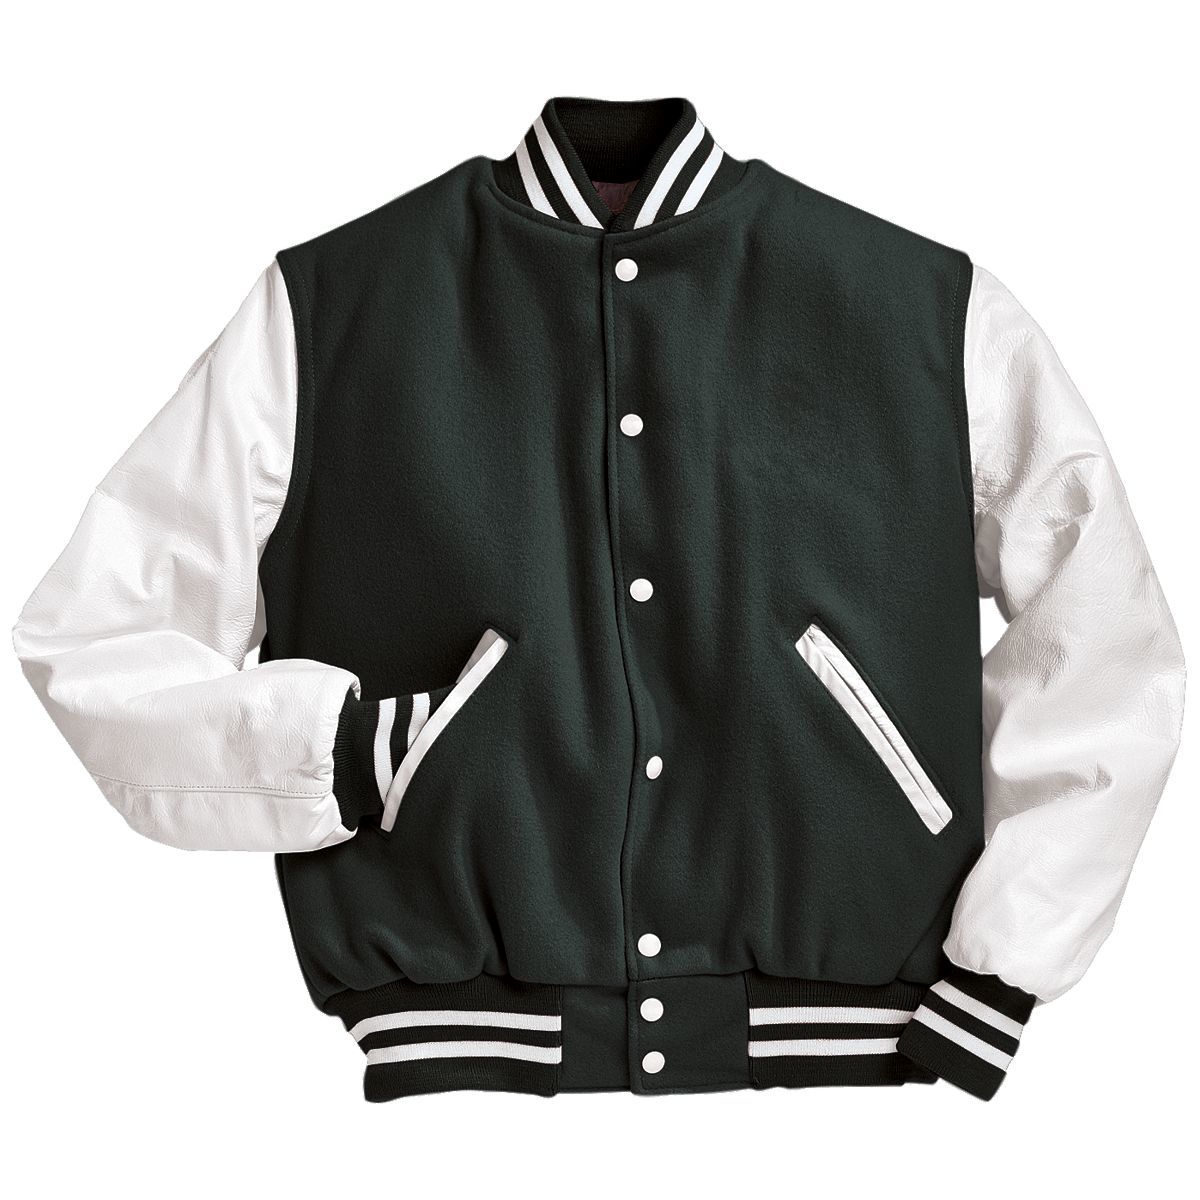 Holloway Varsity Tall Jacket in Myrtle/White  -Part of the Adult, Adult-Jacket, Holloway, Outerwear product lines at KanaleyCreations.com